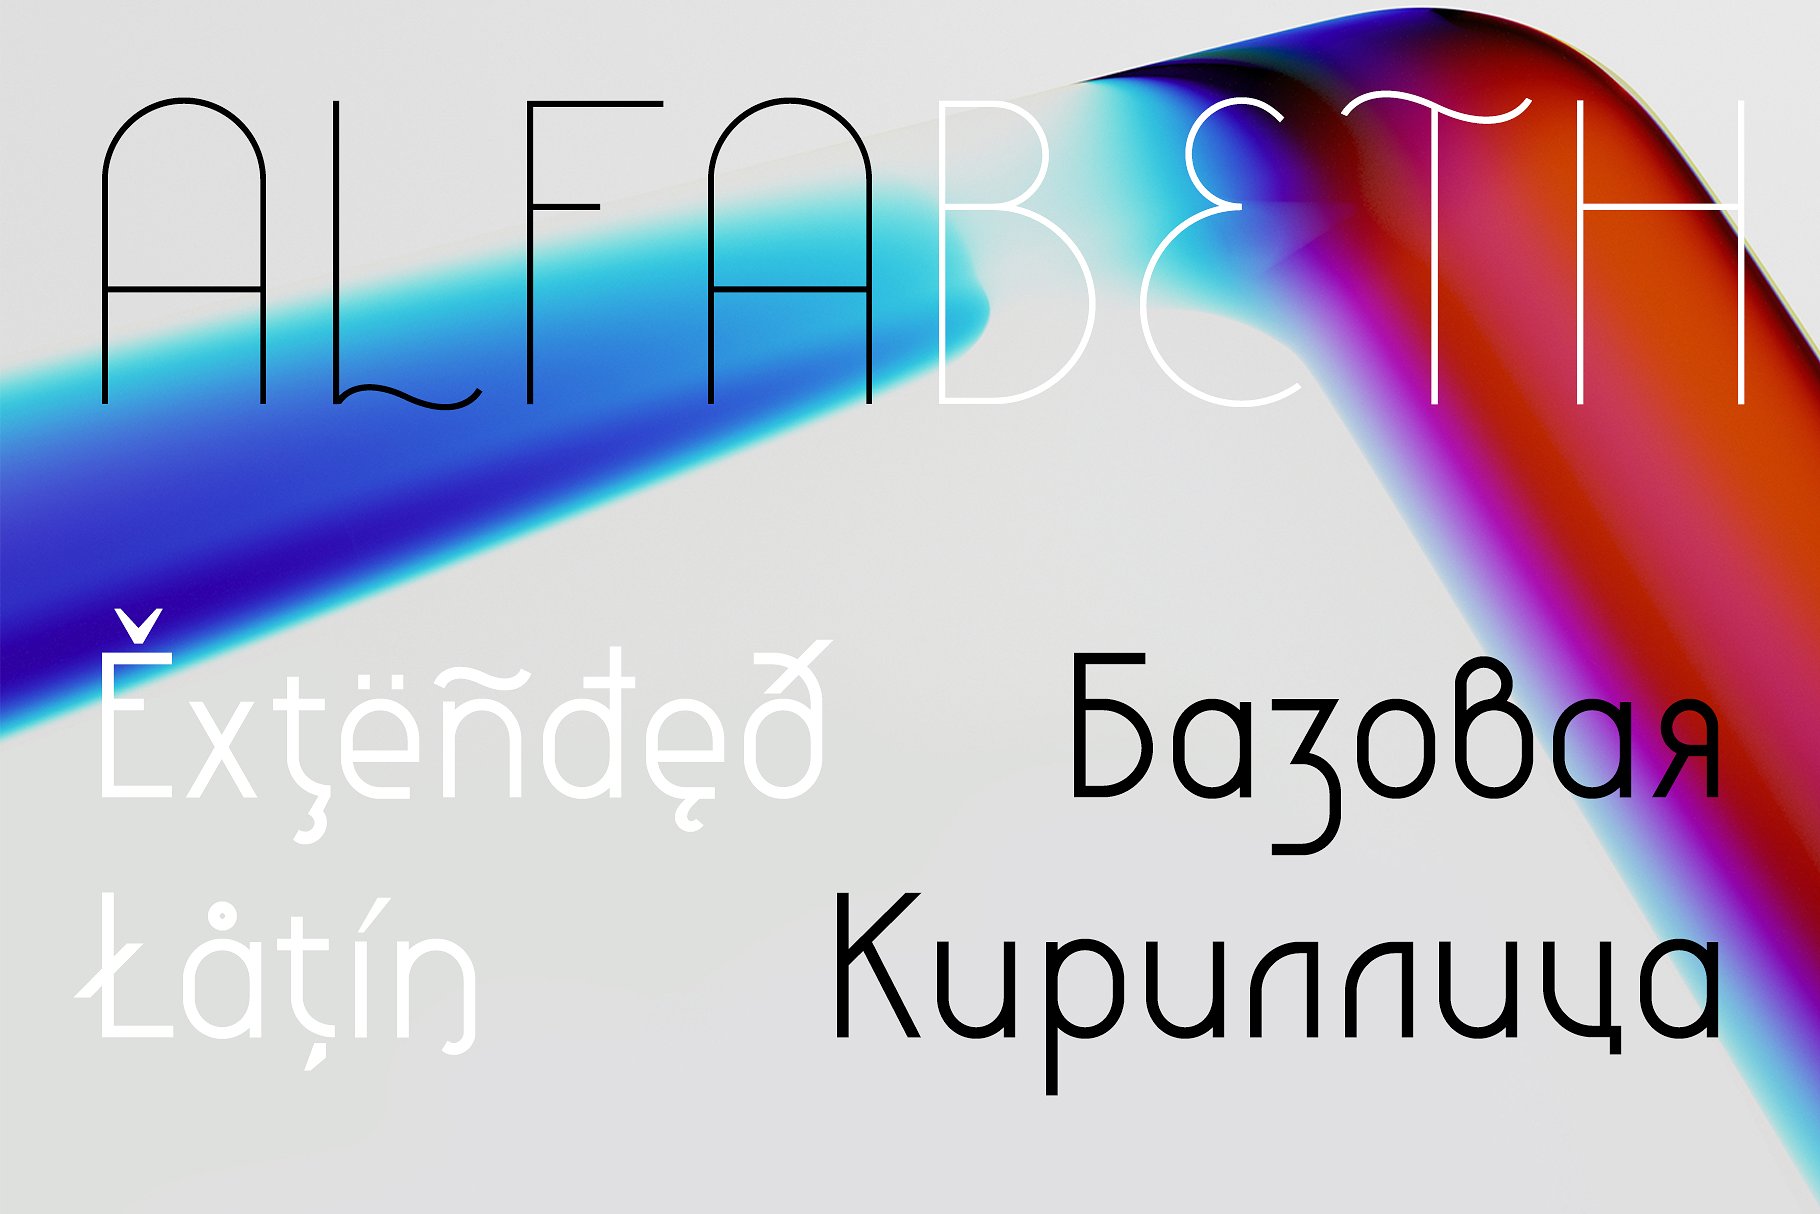 Liberal Condensed Ultra light Font preview